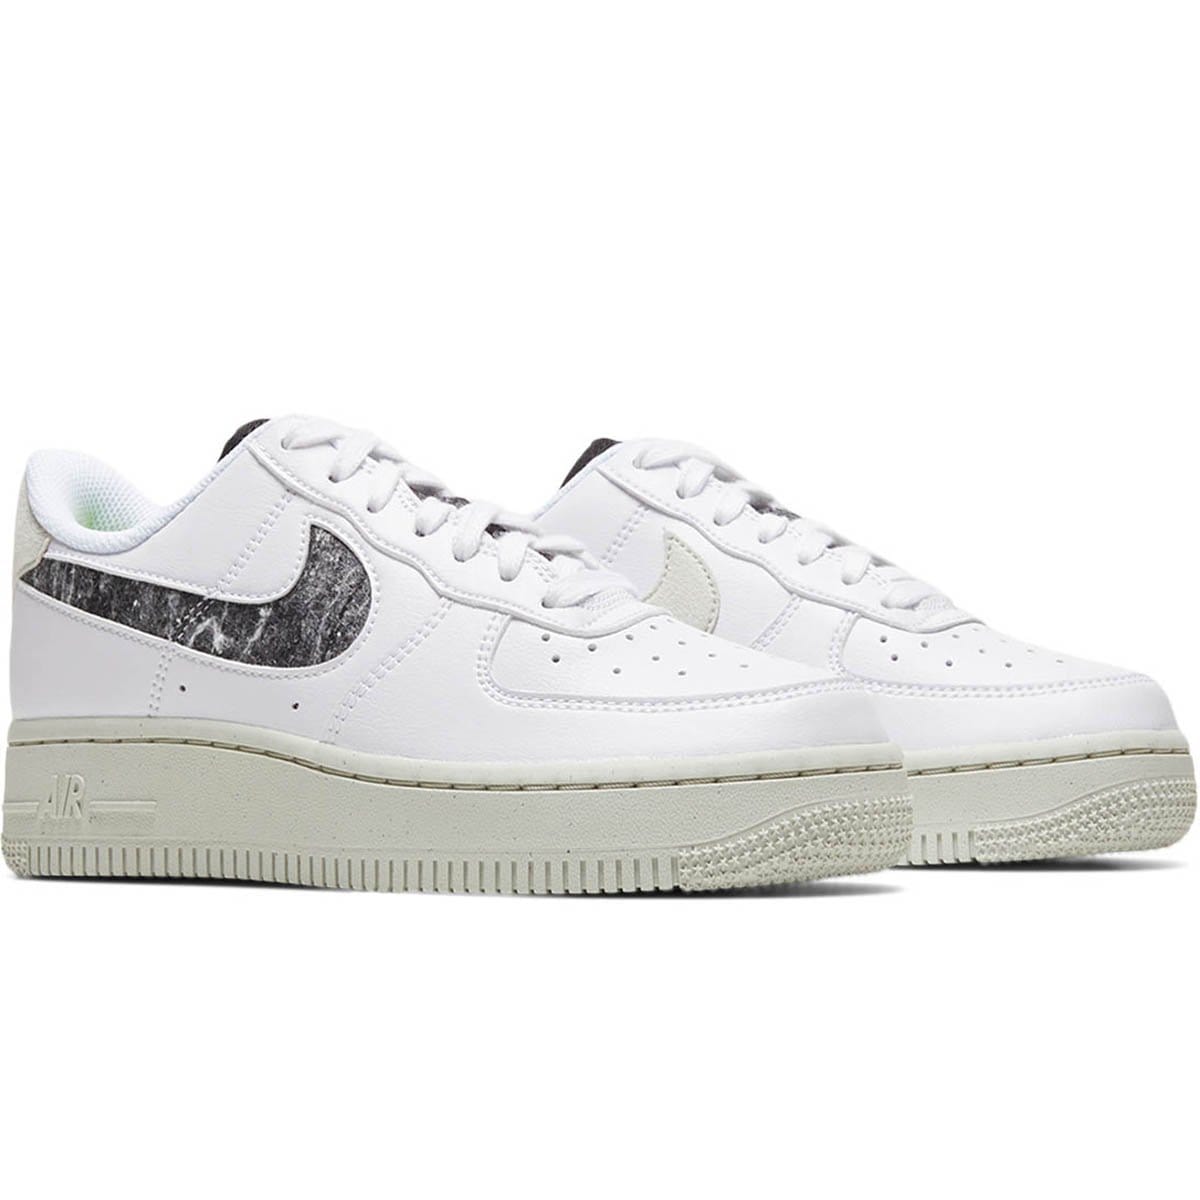 nike air force 1 07 women's white size 9.5